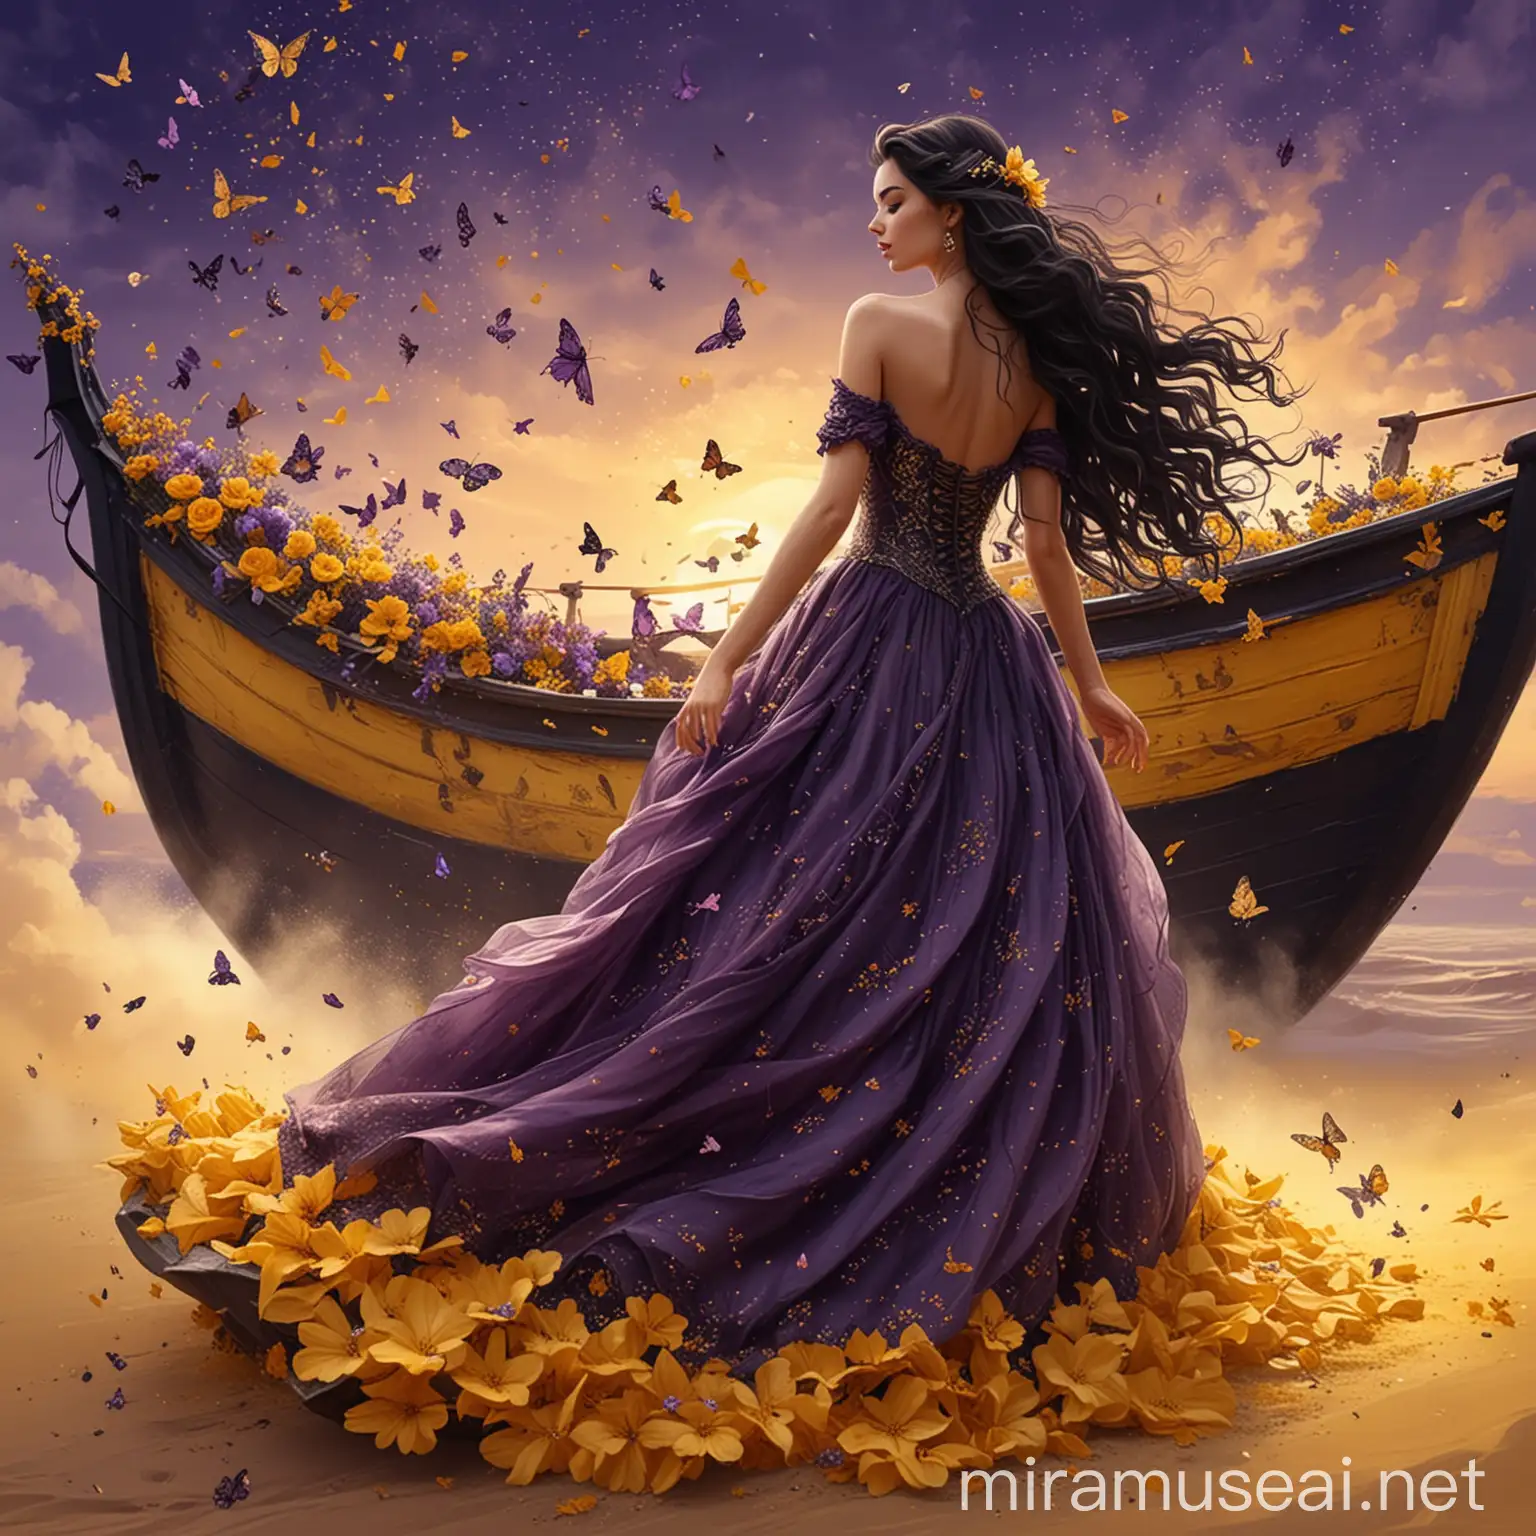 Elegant Woman Dancing on Yellow Dust in Fantasy Floral Boat